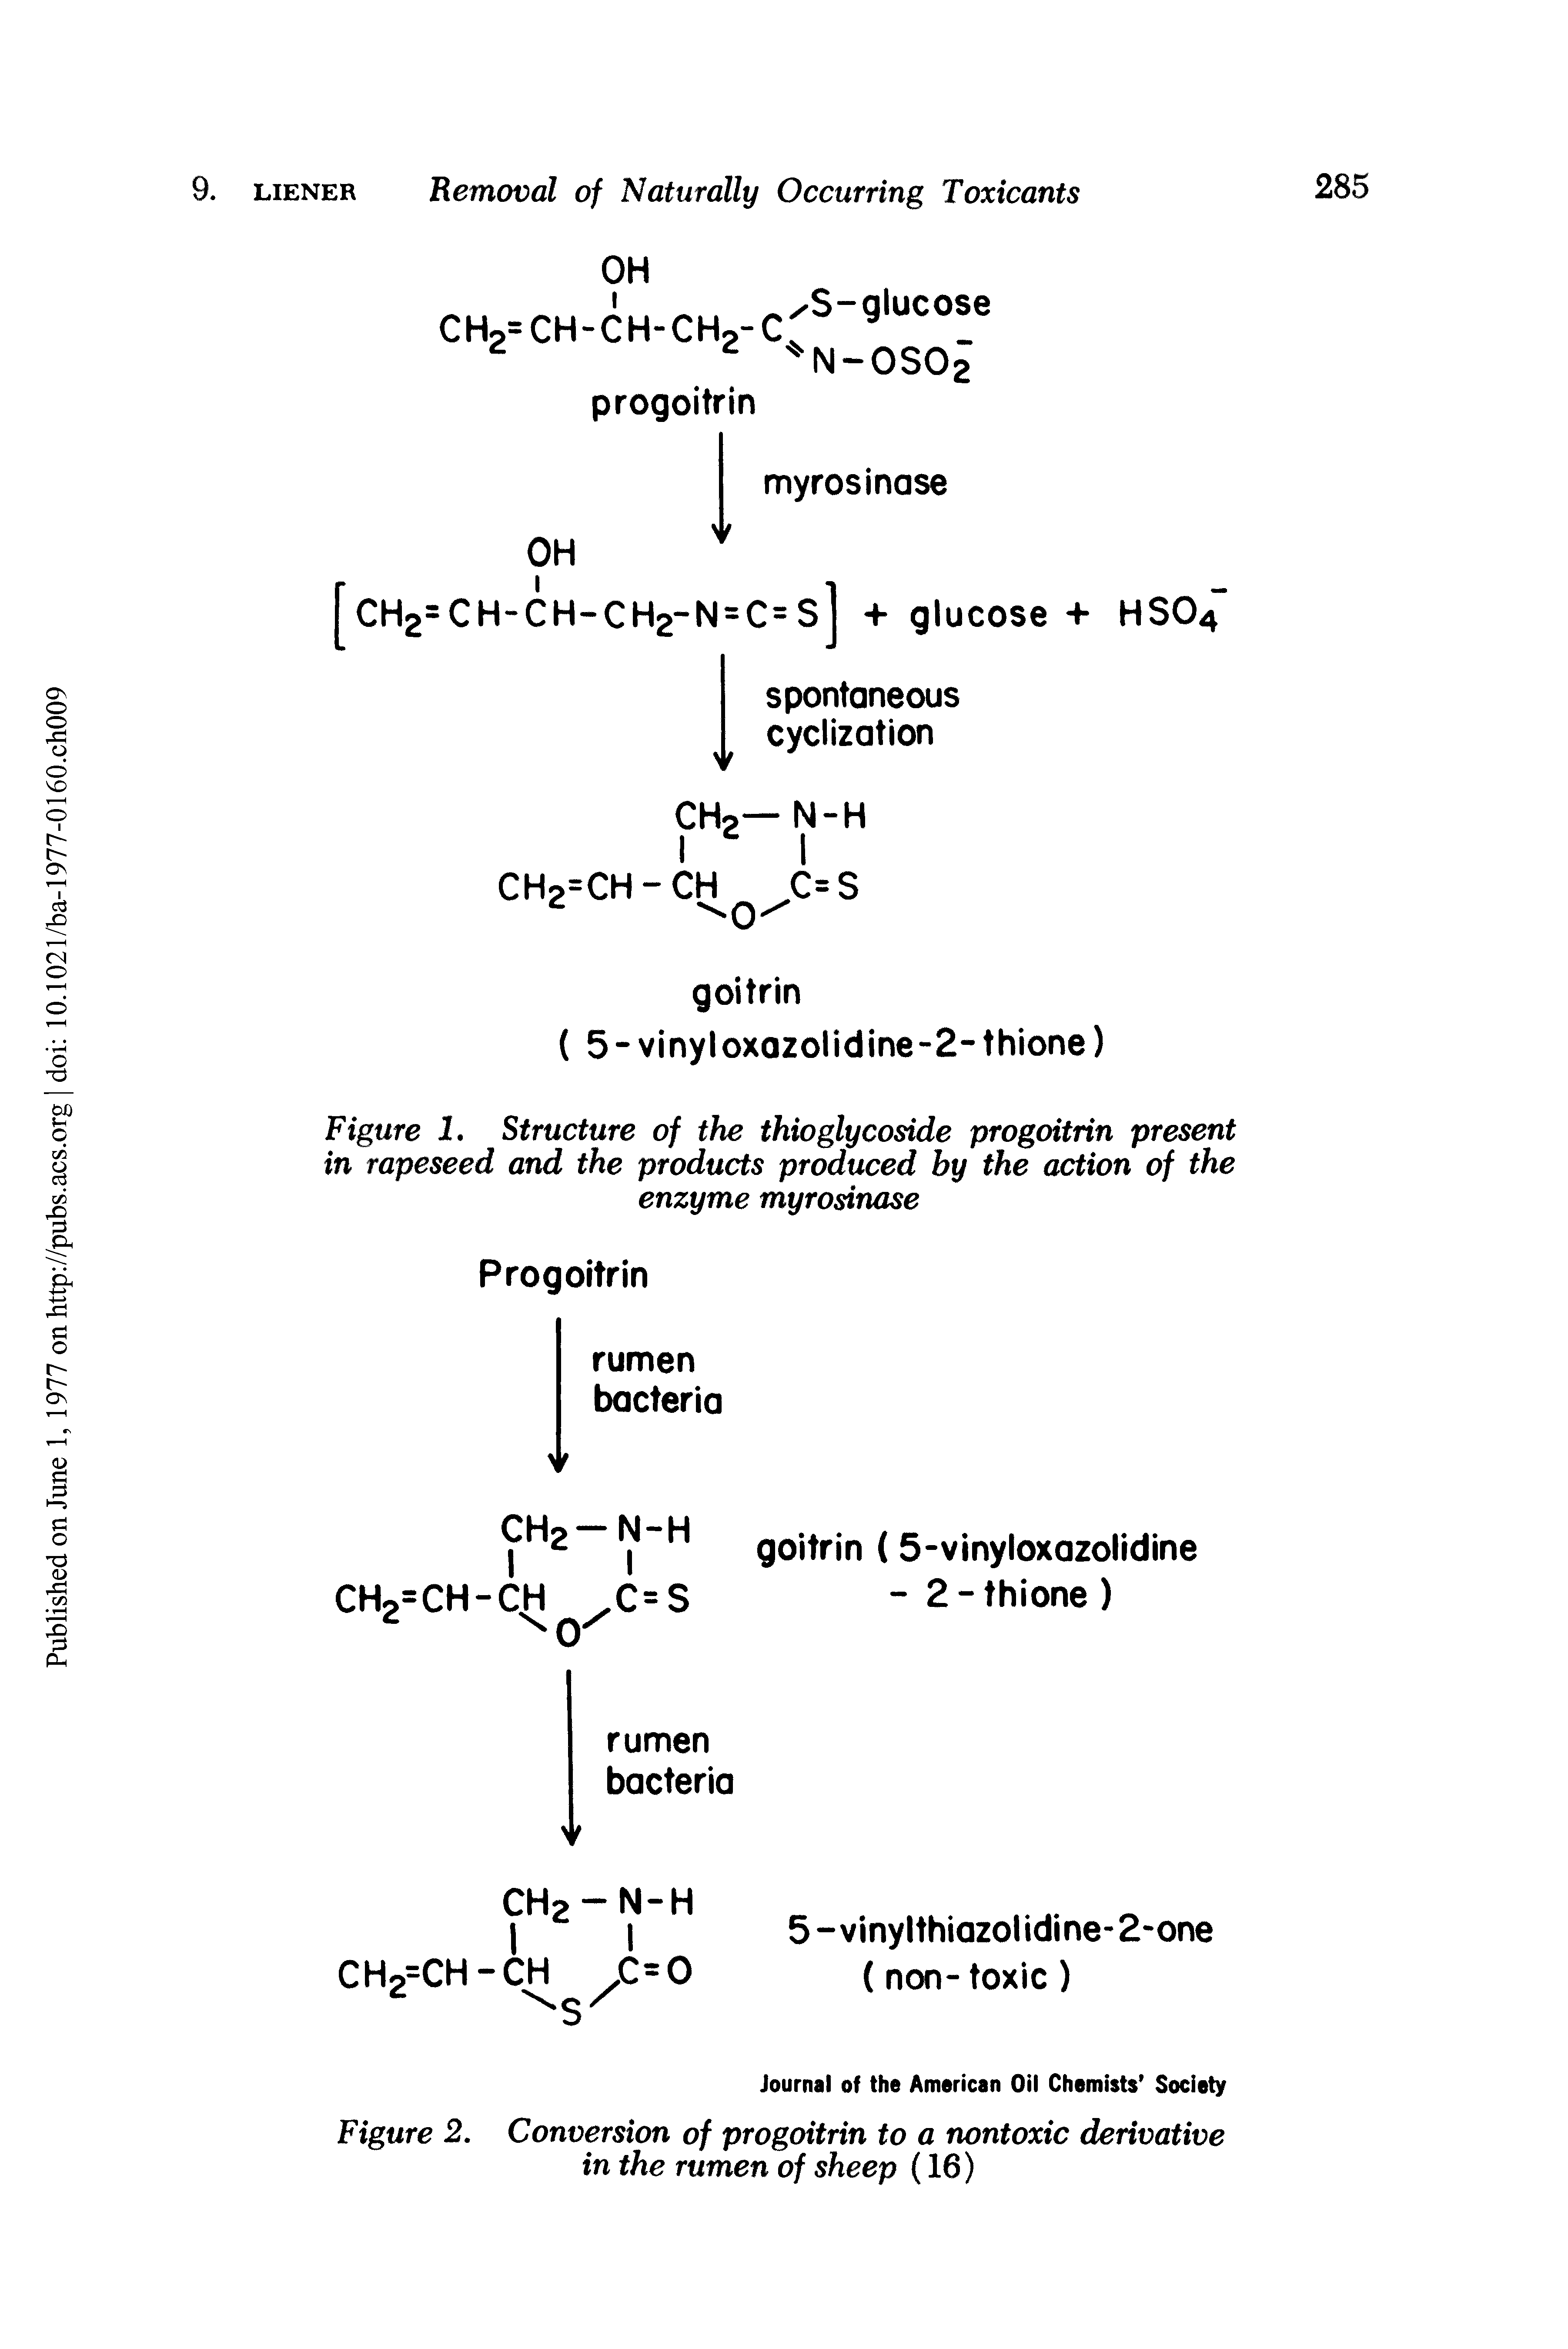 Figure 1. Structure of the thioglycoside progoitrin present in rapeseed and the products produced by the action of the enzyme myrosinase...